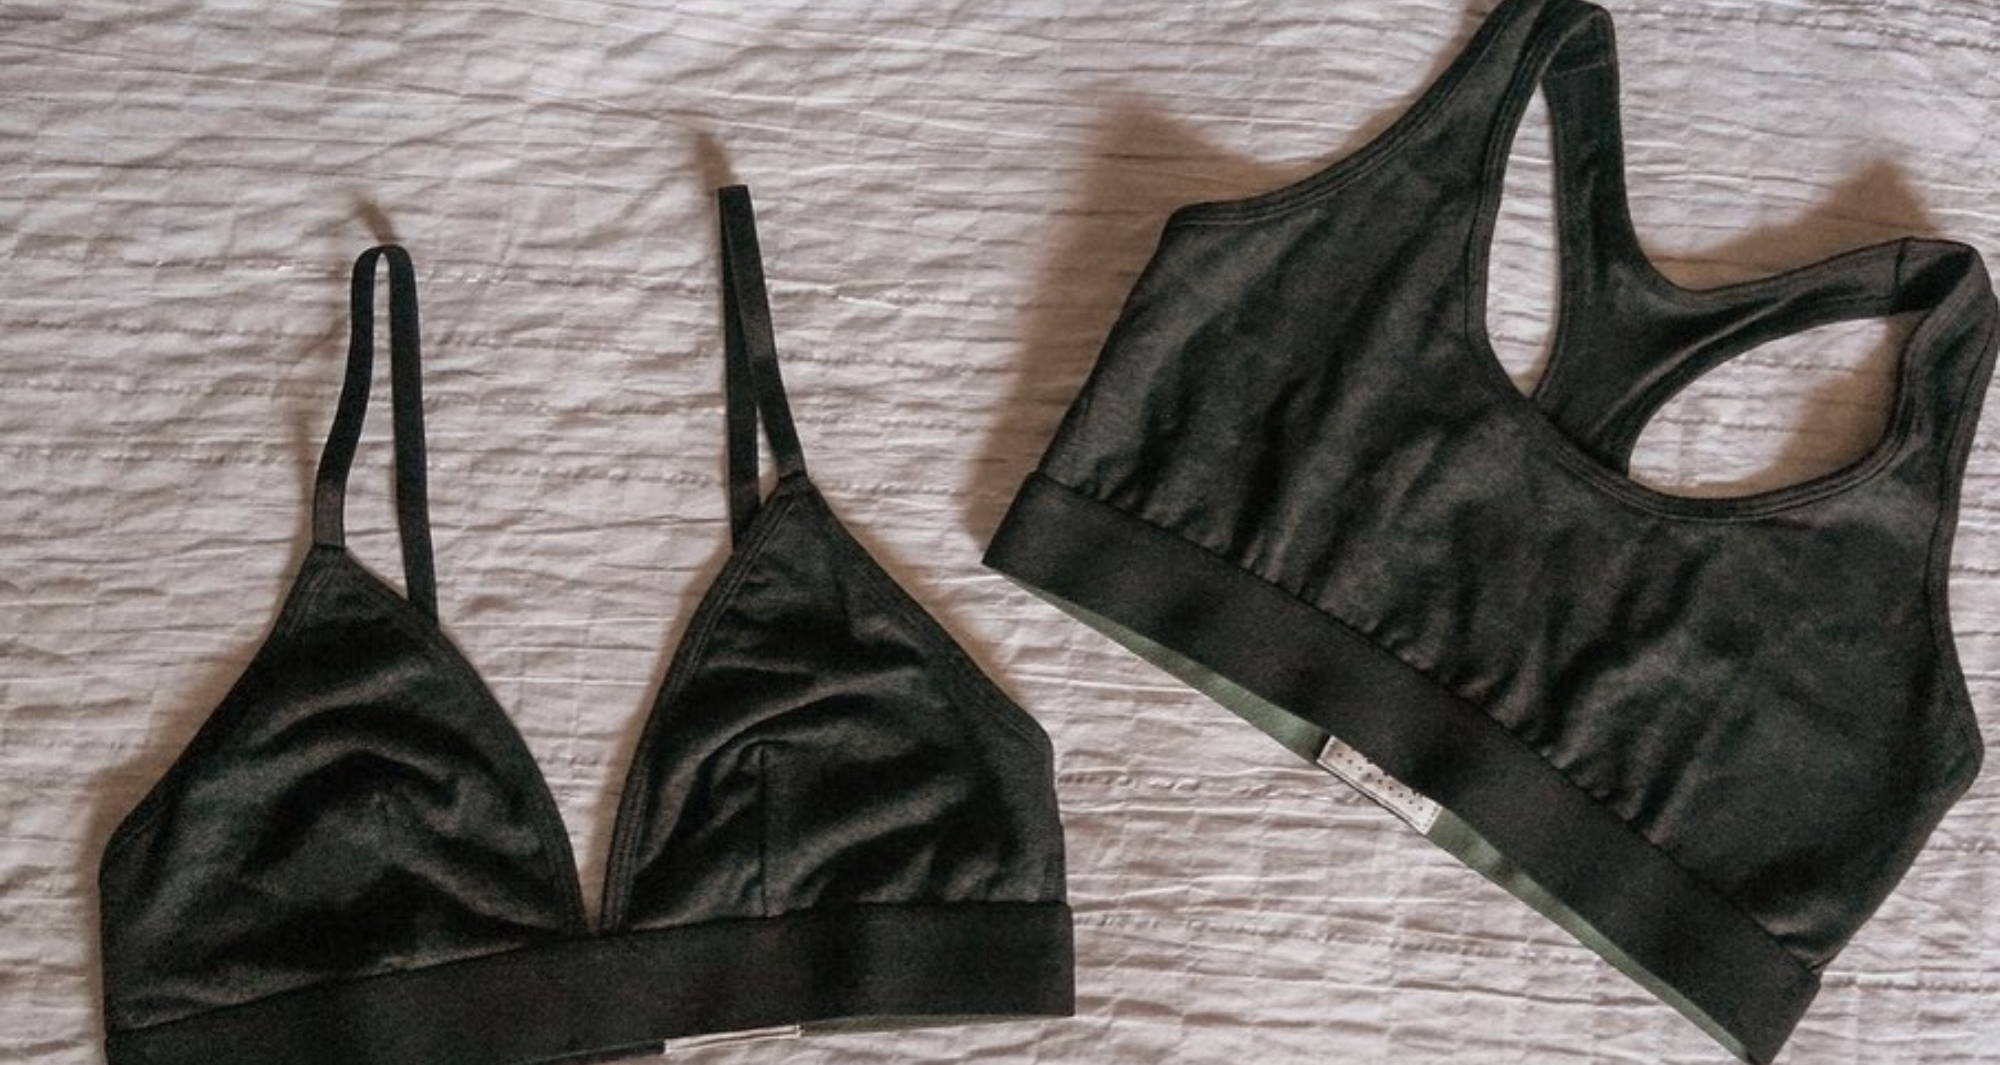 Bralette vs Bra: What is the Difference Between a Bra and Bralette